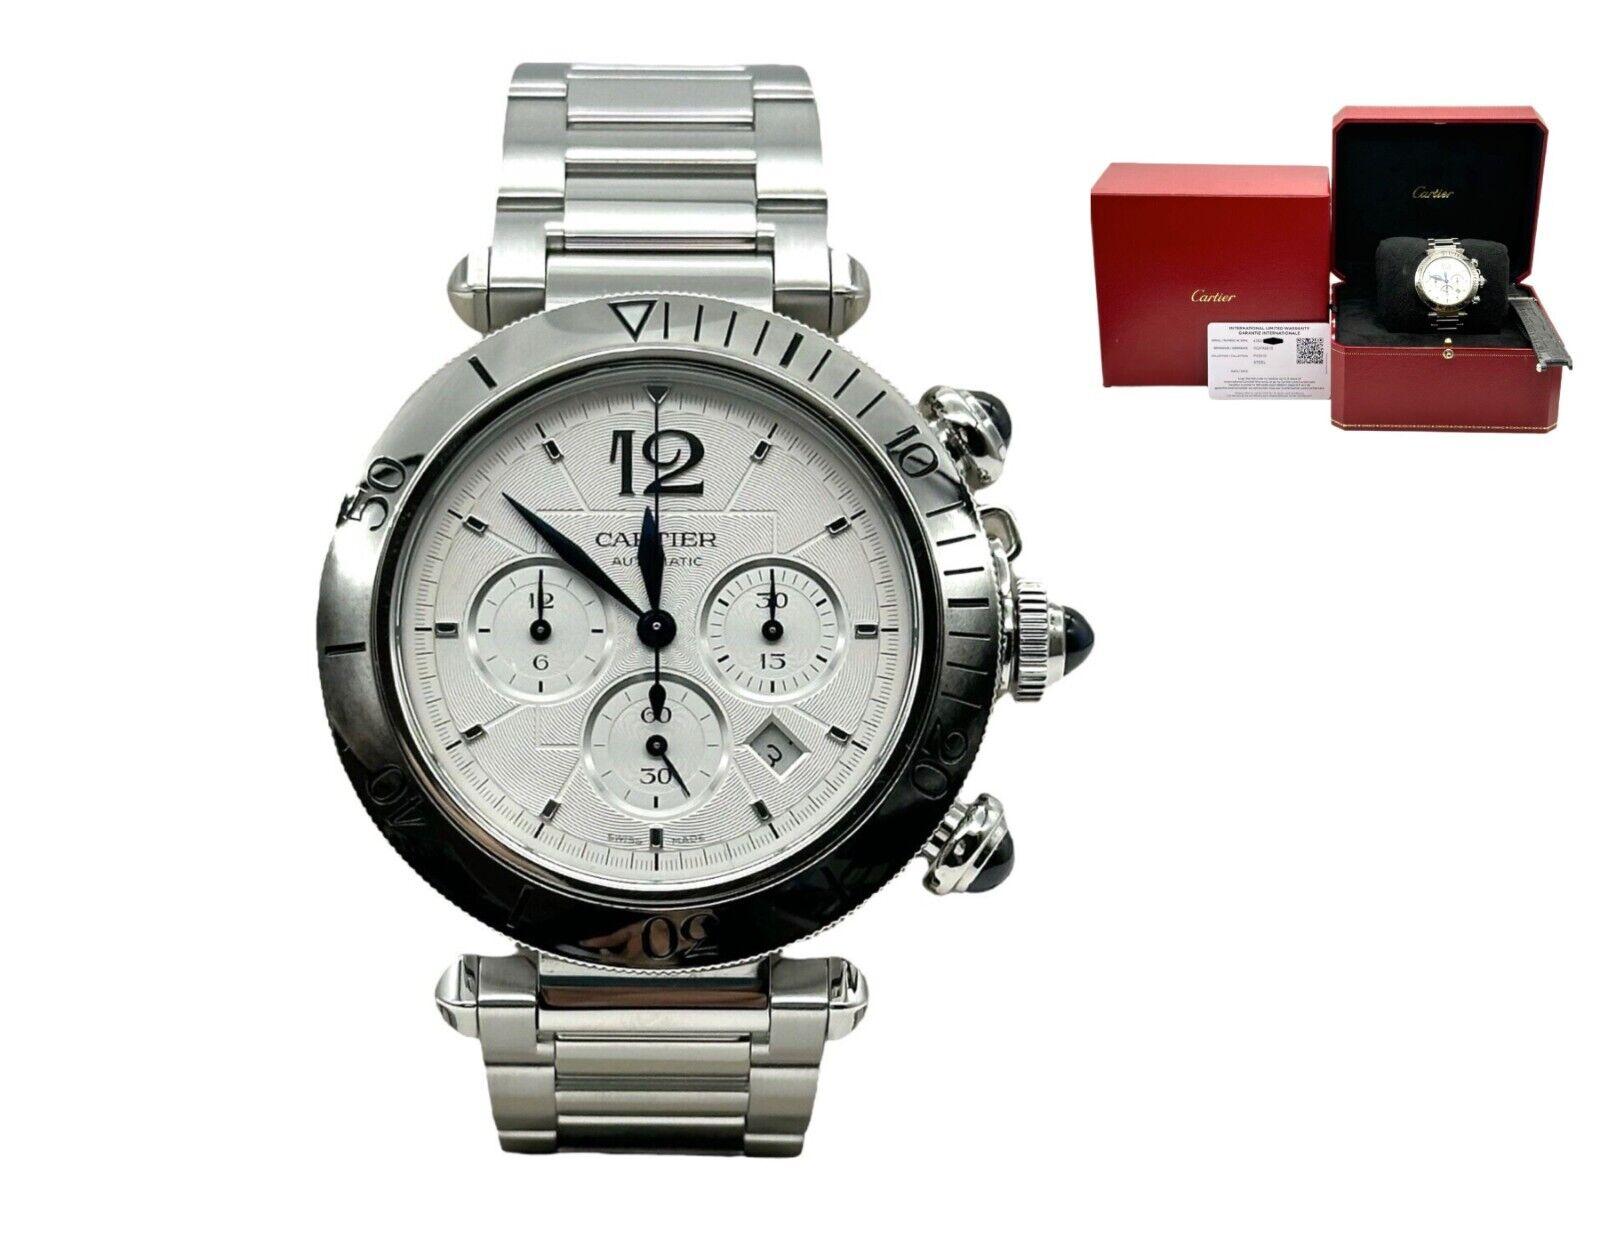 Cartier Pasha WSPA0018 Chronograph Ref 4363 Chronograph Stainless Box Paper For Sale 4